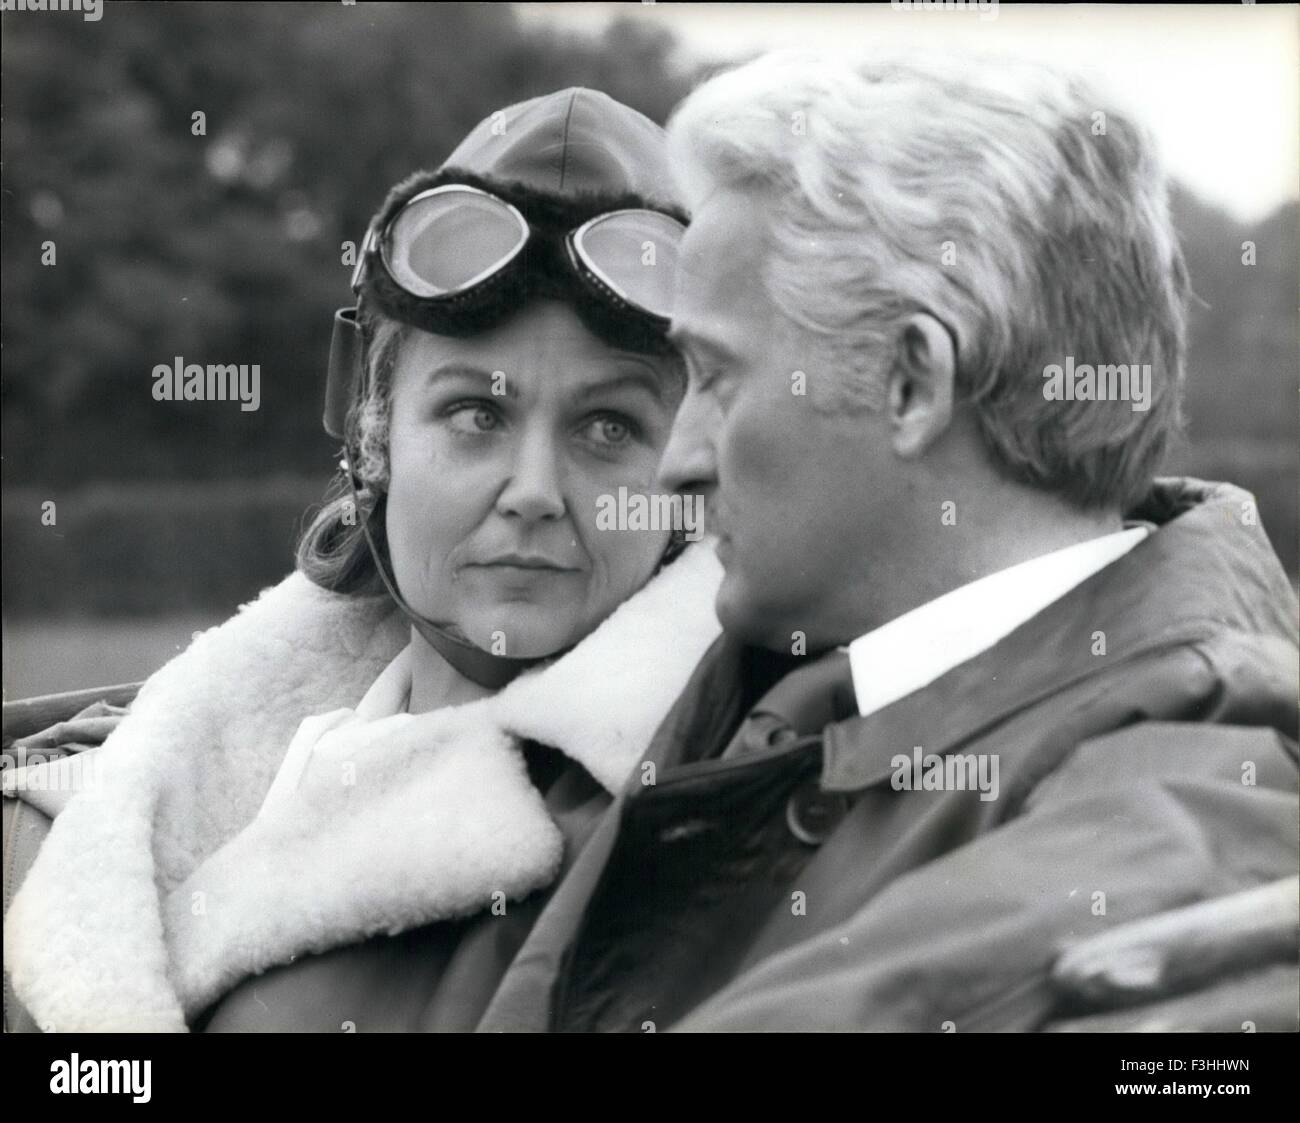 Lee Remick, as Jennie, Lady Randolph Churchill searches her third husband Montie Parch, played by Charles Kay, for approval before her flight. He is reluctant, but knows he cannot stop her. 24th Feb, 1967. © Keystone Pictures USA/ZUMAPRESS.com/Alamy Live News Stock Photo